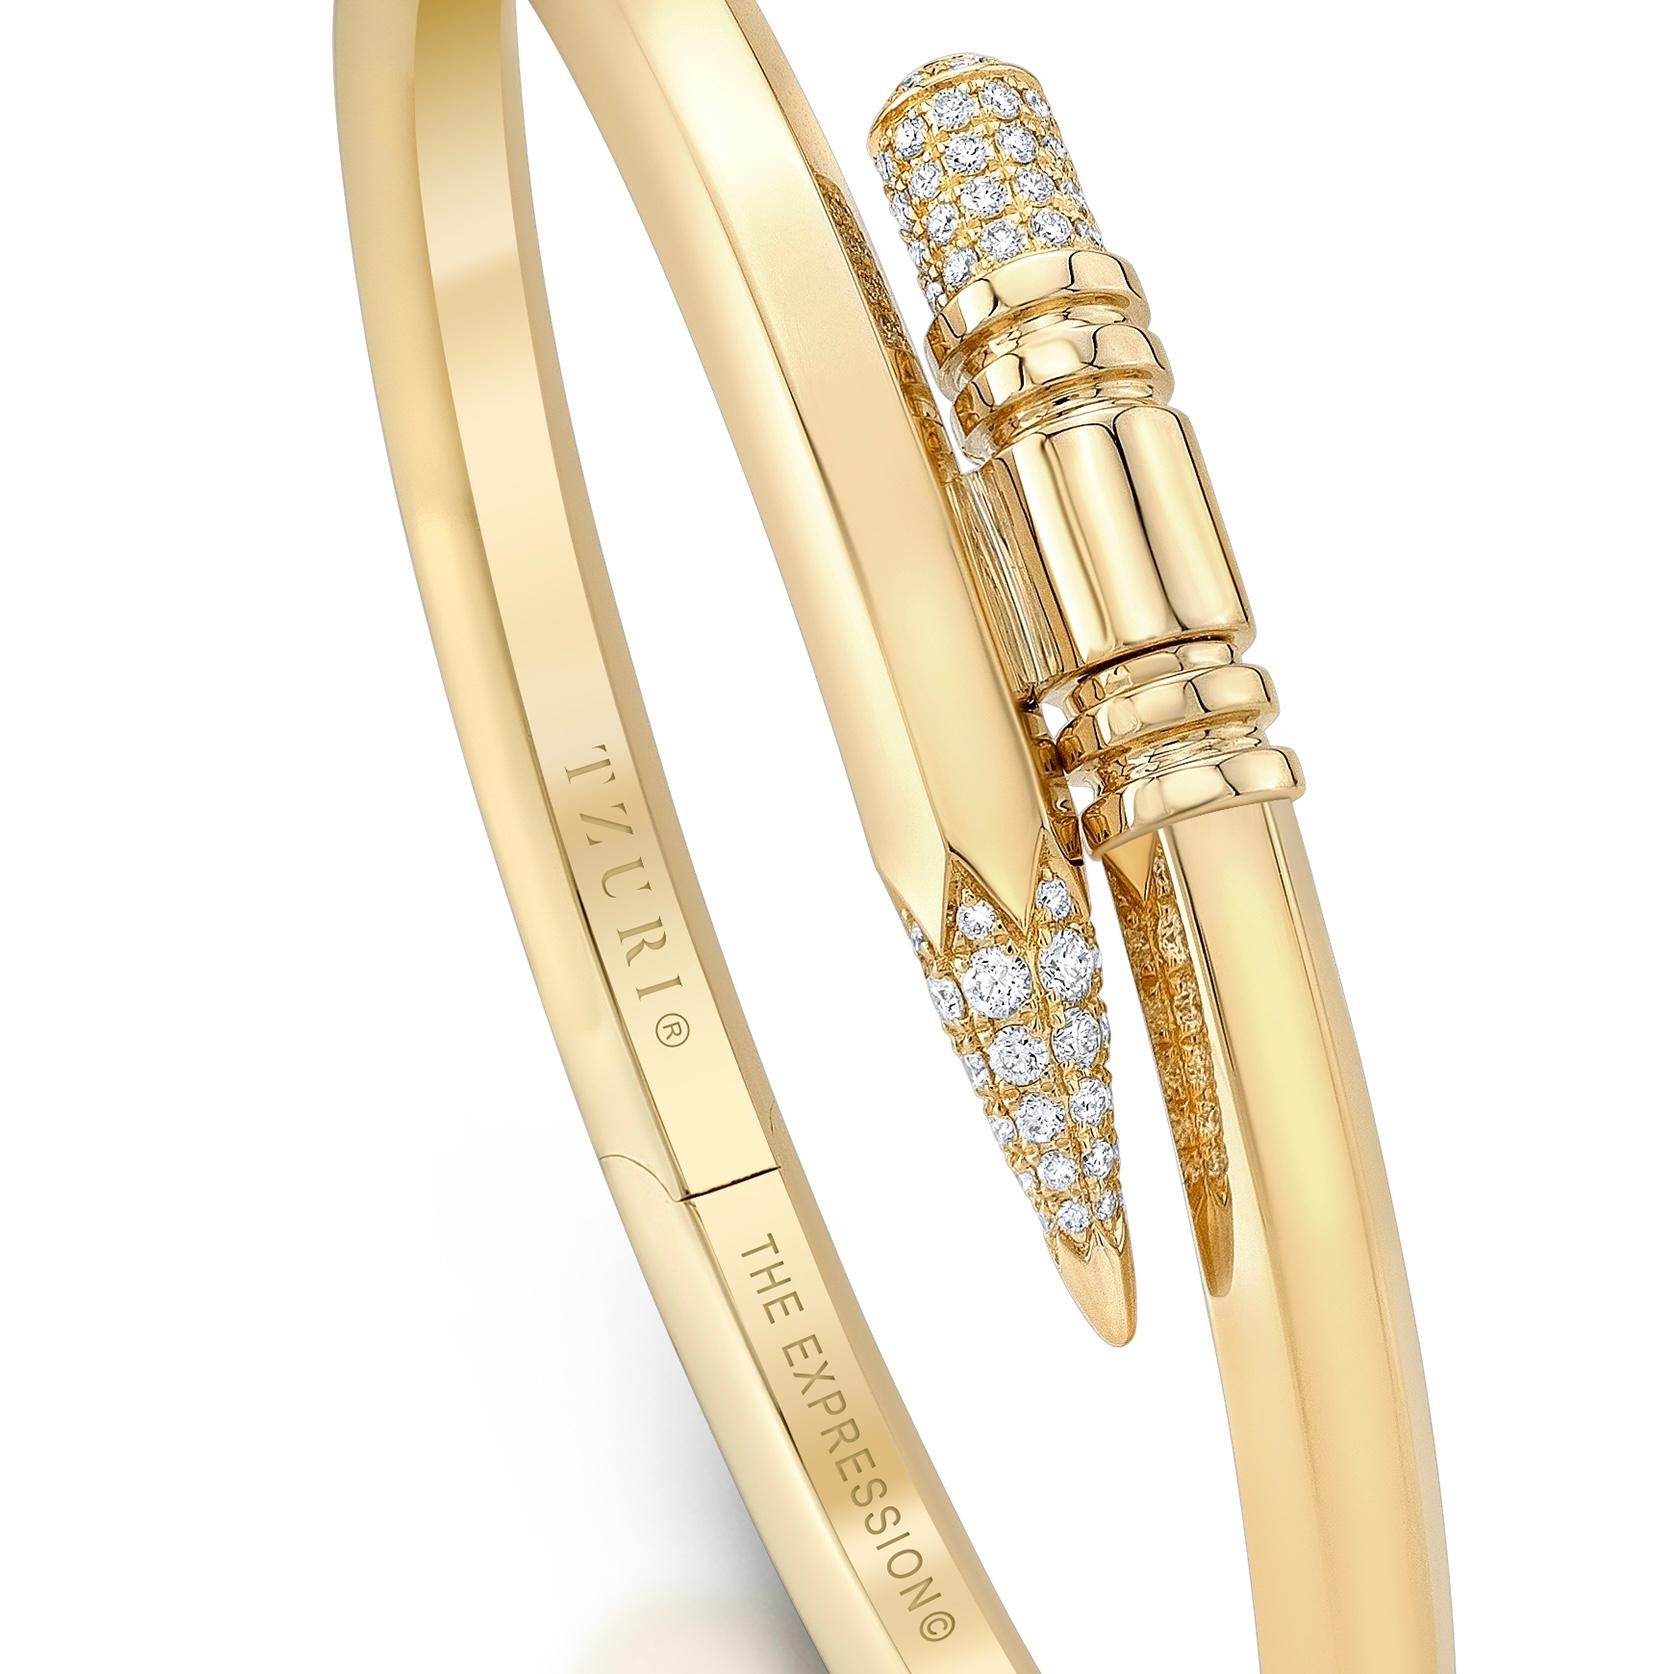 18K Yellow Gold Small Expression Bracelet

4 mm Gauge Thickness

Weight: 0.45 ct (approx.)

Color: F-G
Clarity: VS+

Bracelets are produced in limited editions of 500 units, per design, annually. They are engraved with the serial number and